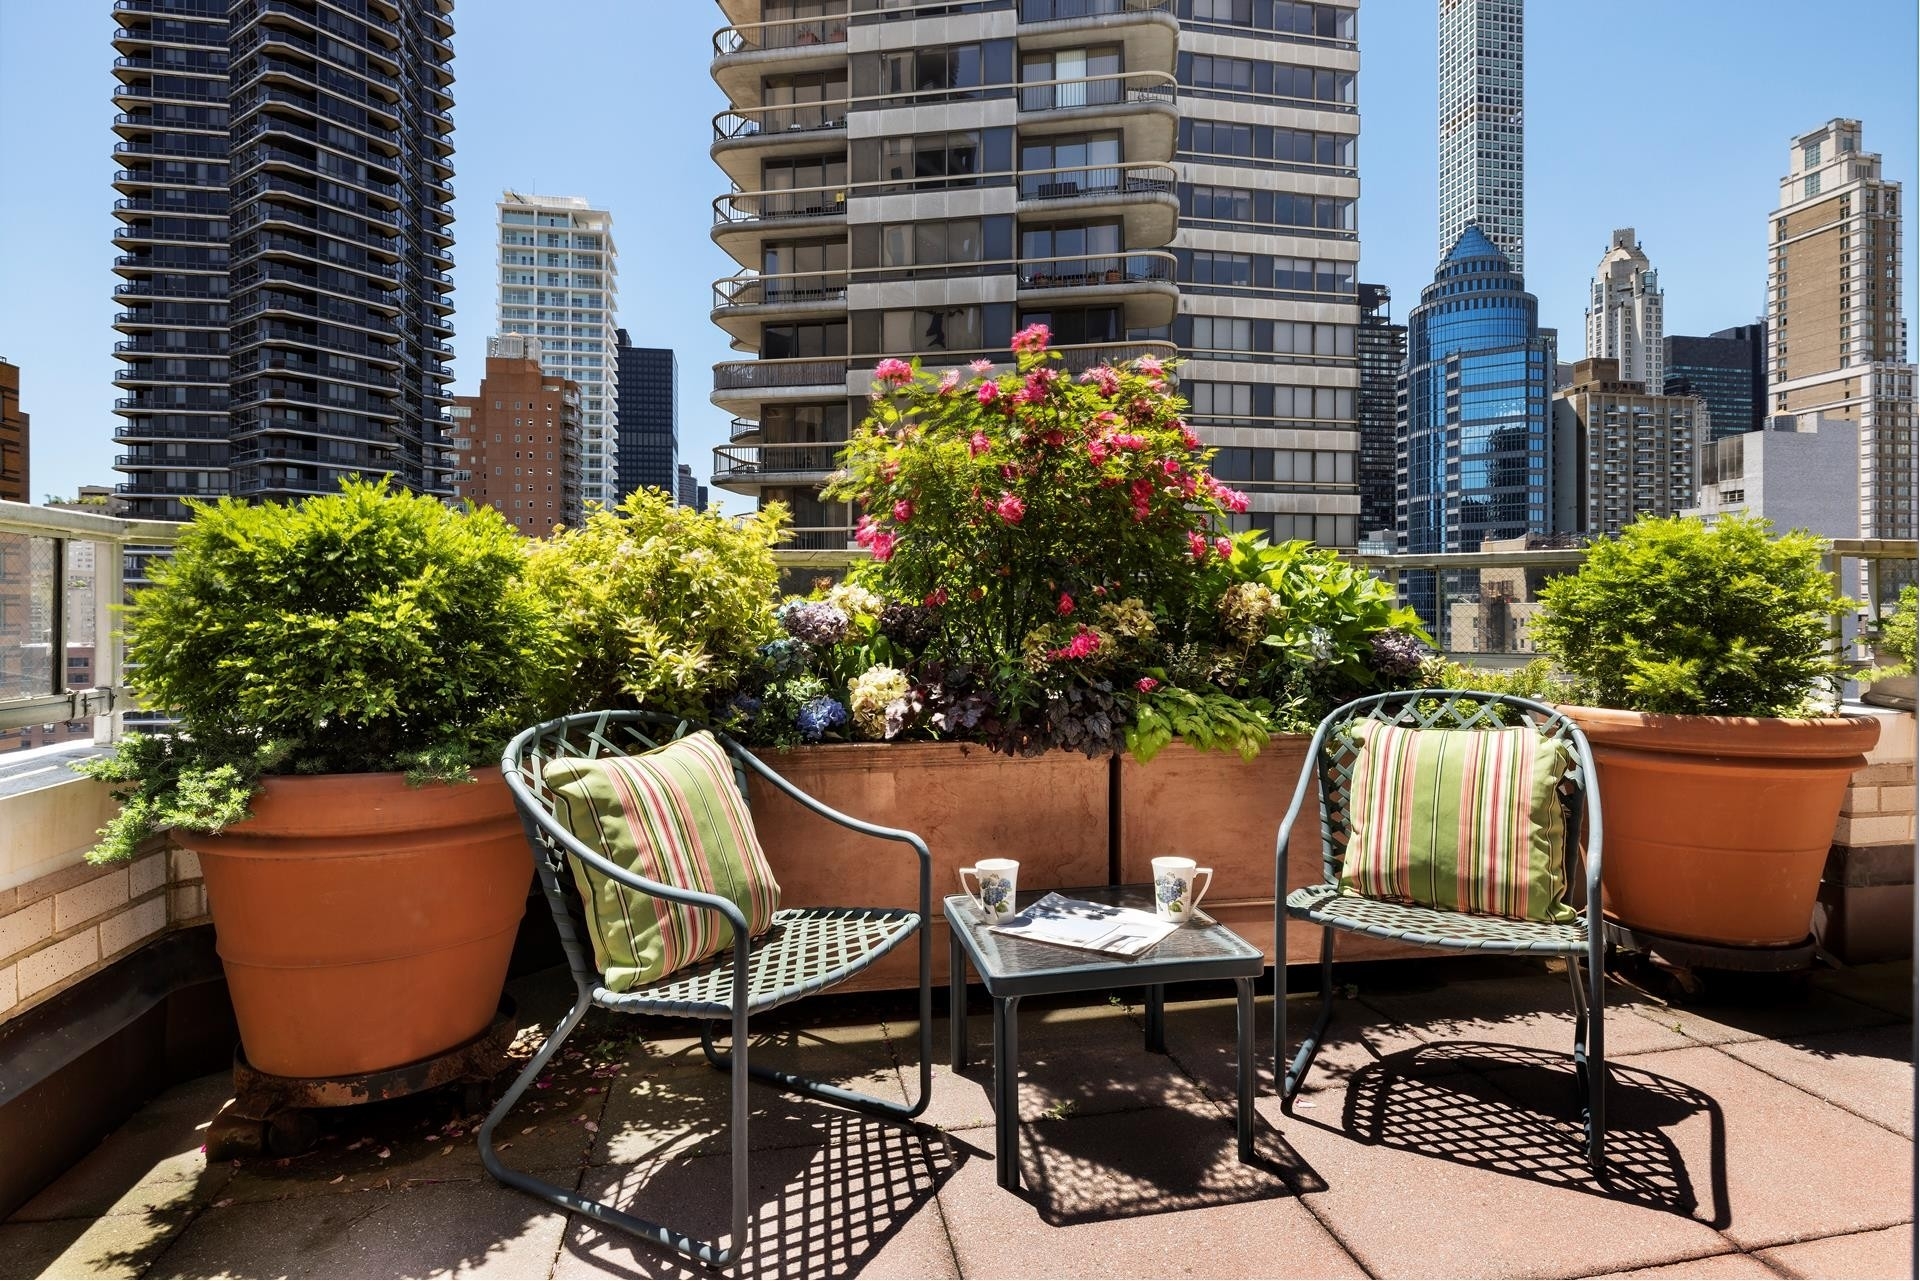 Co-op Properties for Sale at The Victorian, 175 E 62ND ST, 16B Lenox Hill, New York, NY 10065